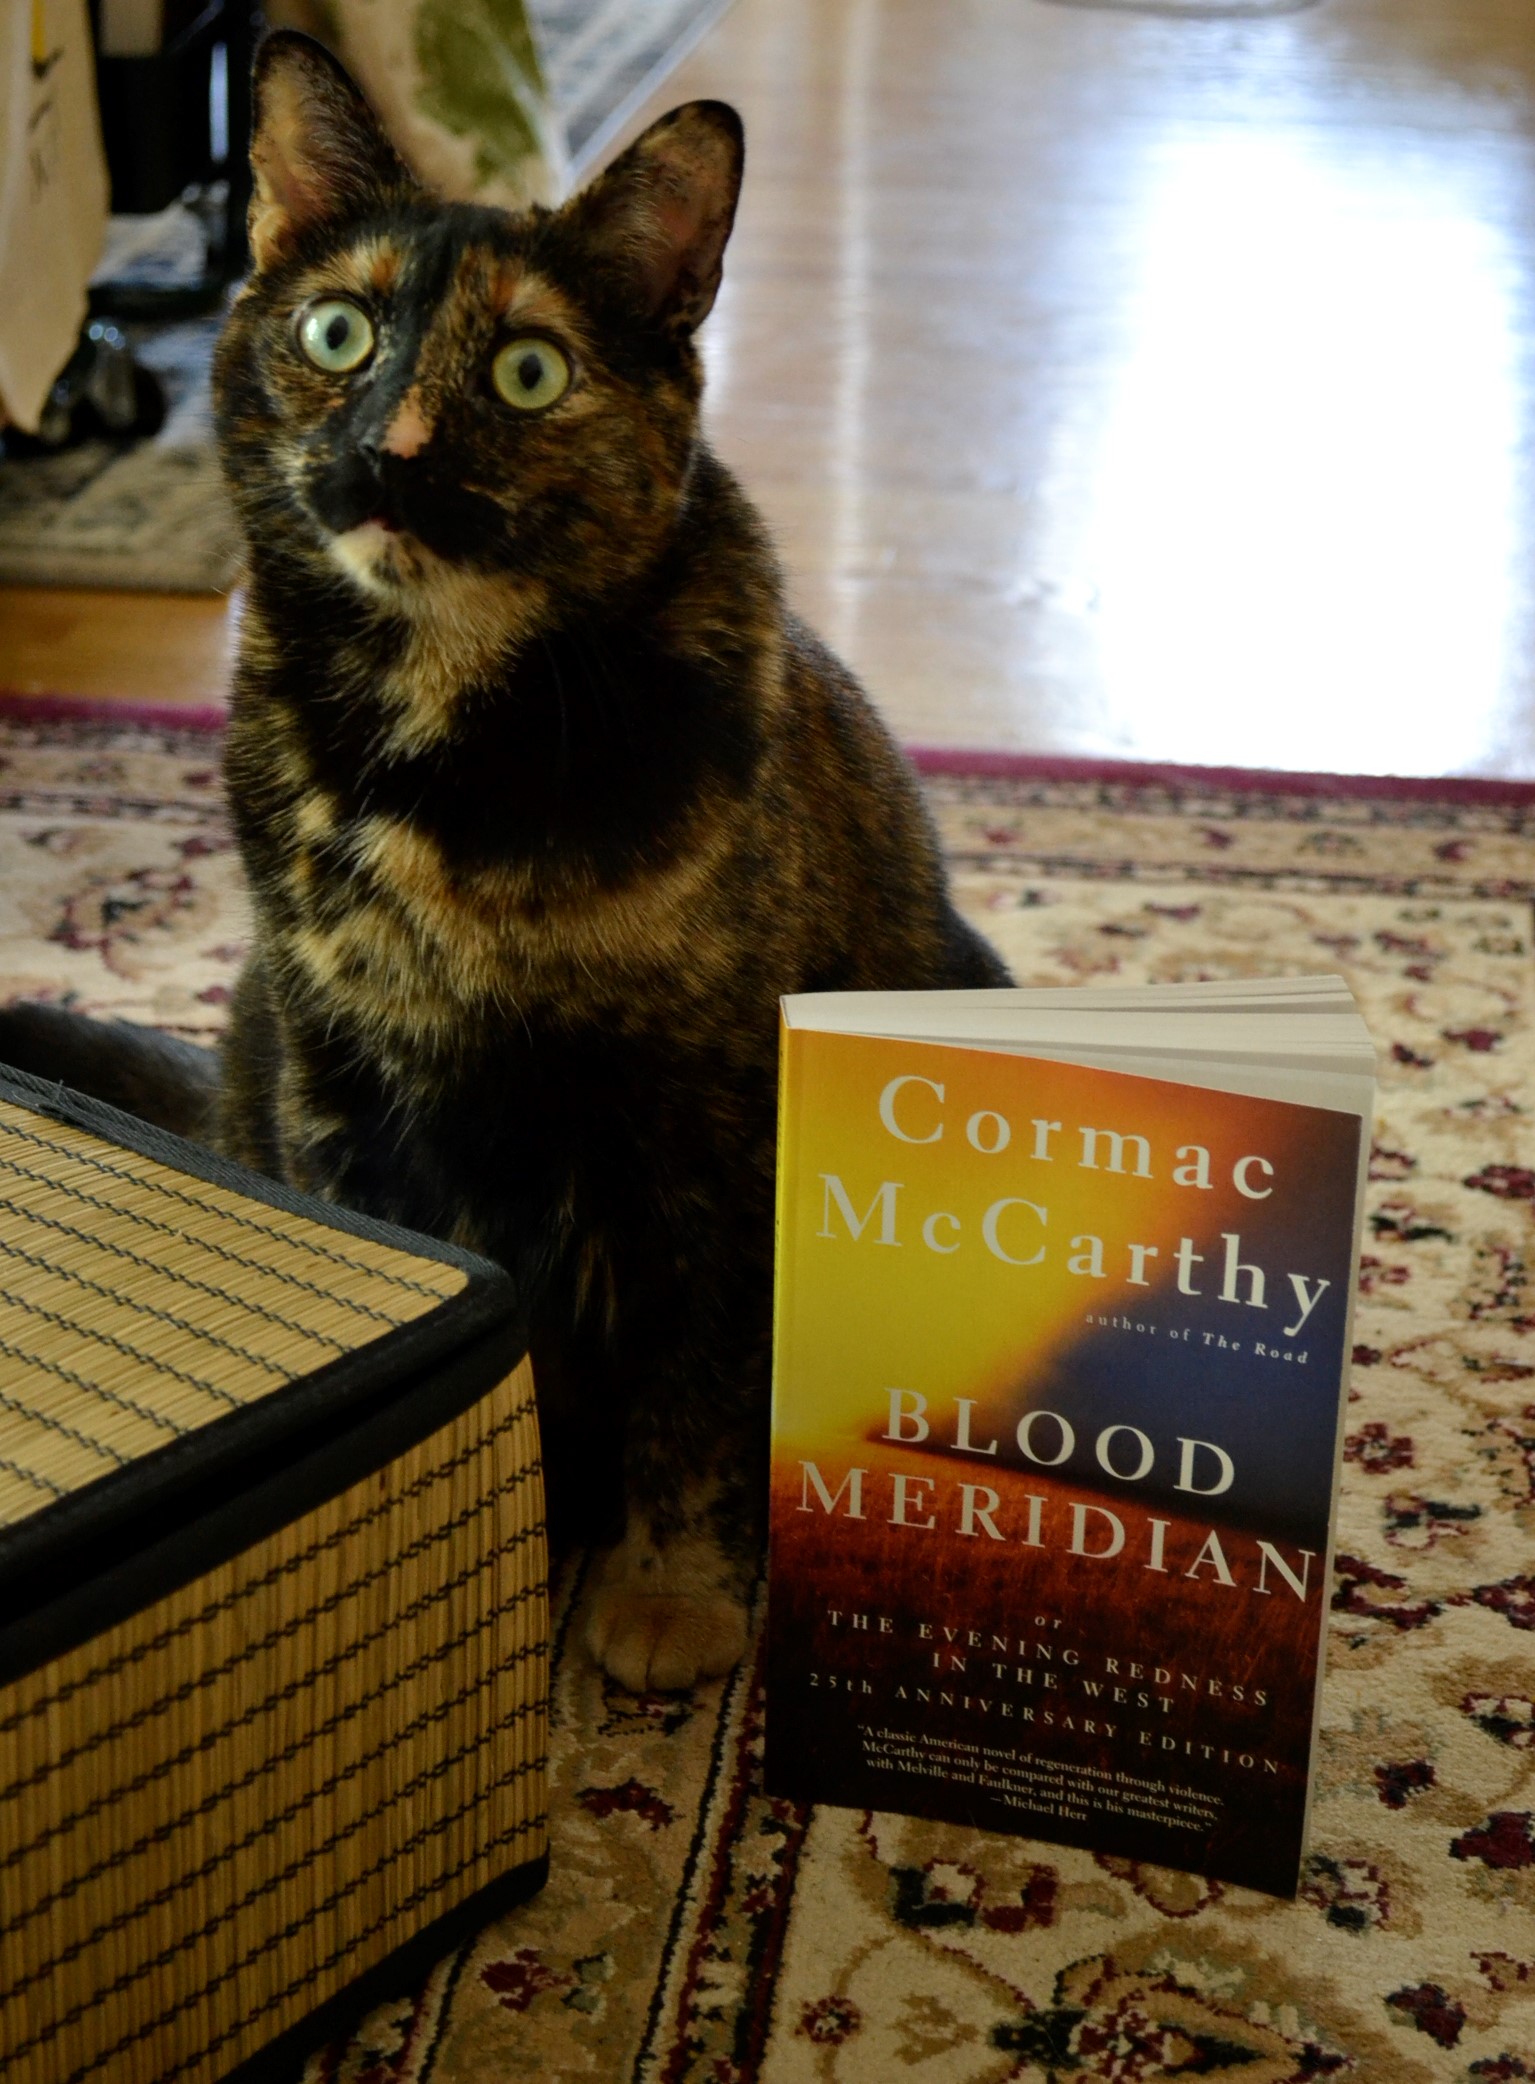 Beside a basket, a tortoiseshell cat sits peacefully. Beside her is the violently red and yellow cover of Blood Meridian.